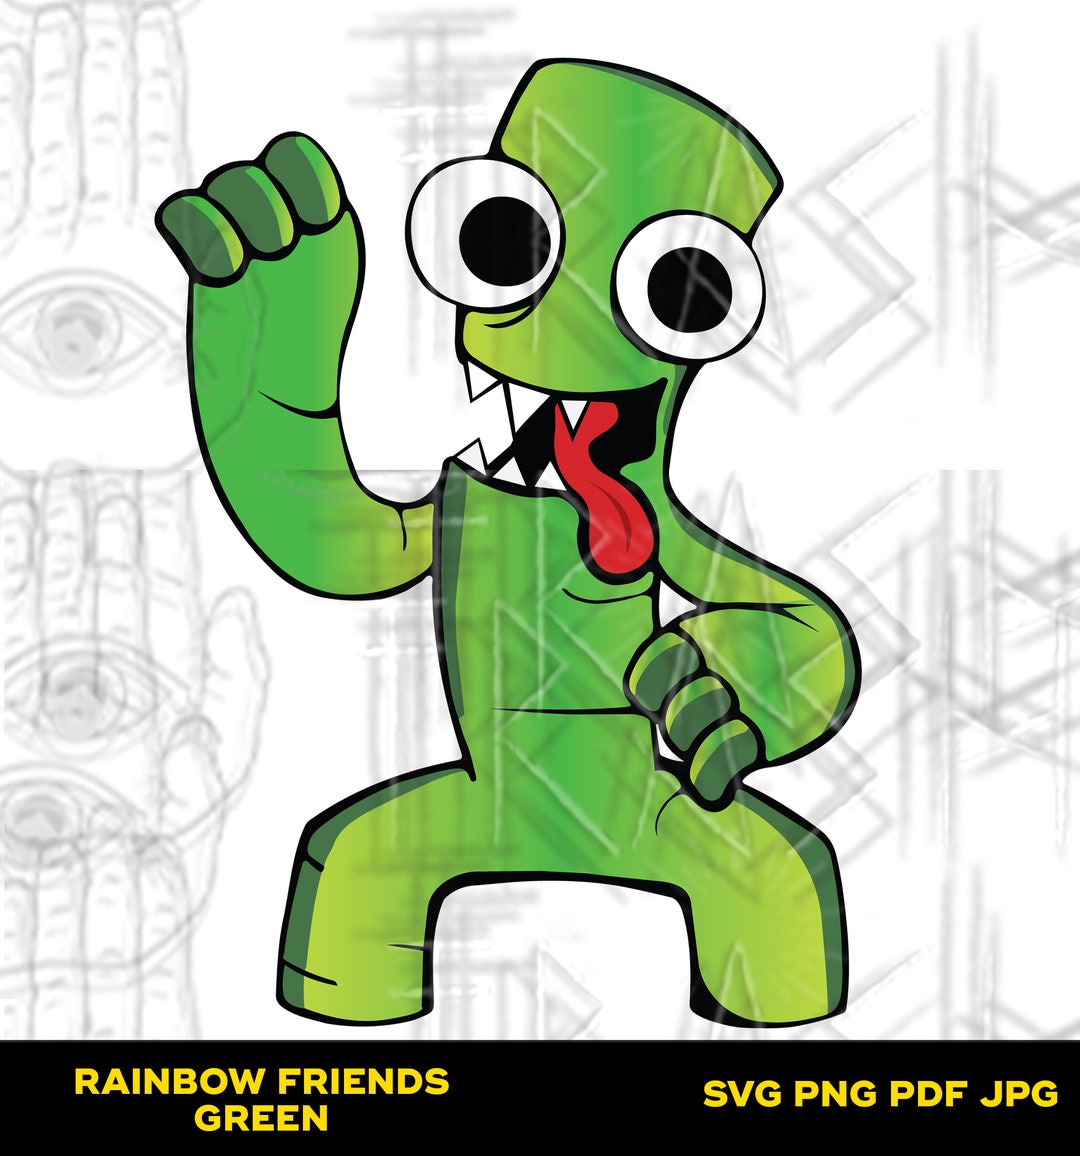 Rainbow Friends Blue and Green Face SVG and PNG Good for -  Sweden